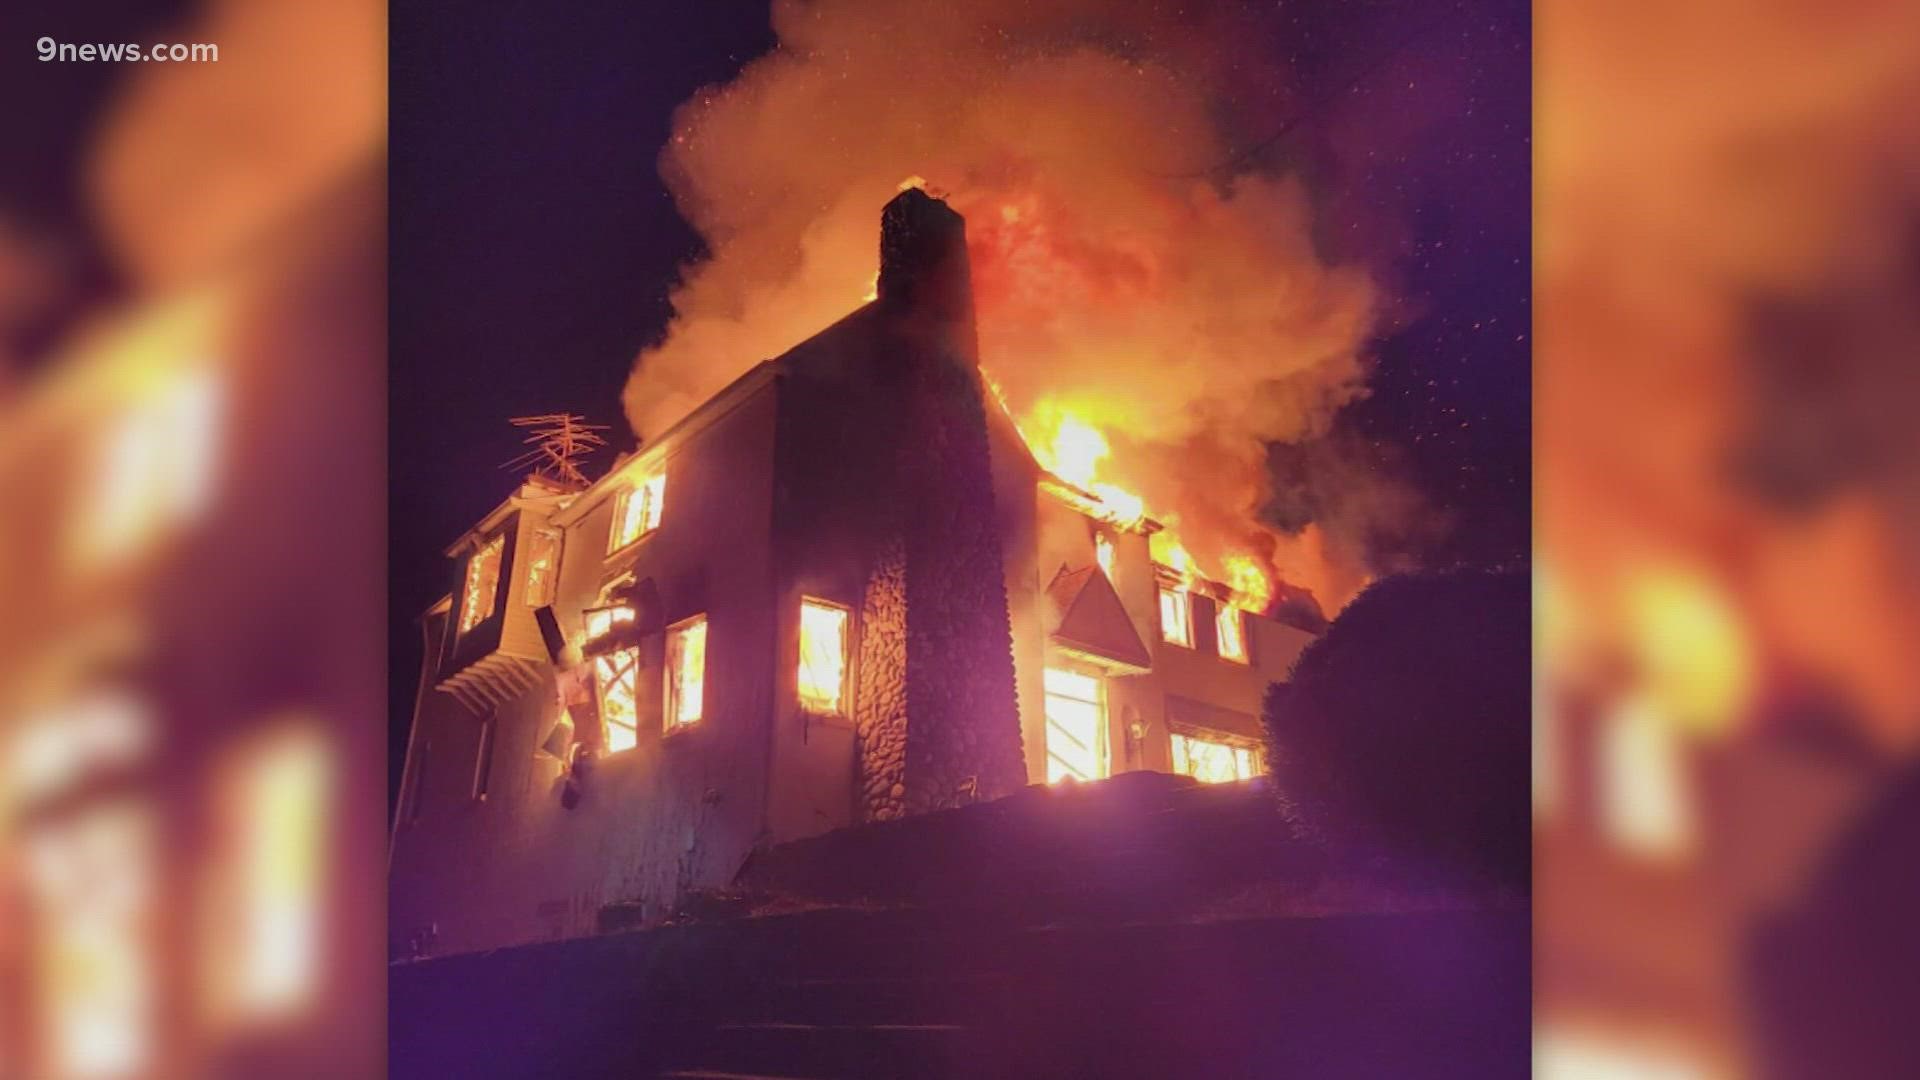 What started as an attempt to get rid of household pests ended with a million-dollar home going up in flames.